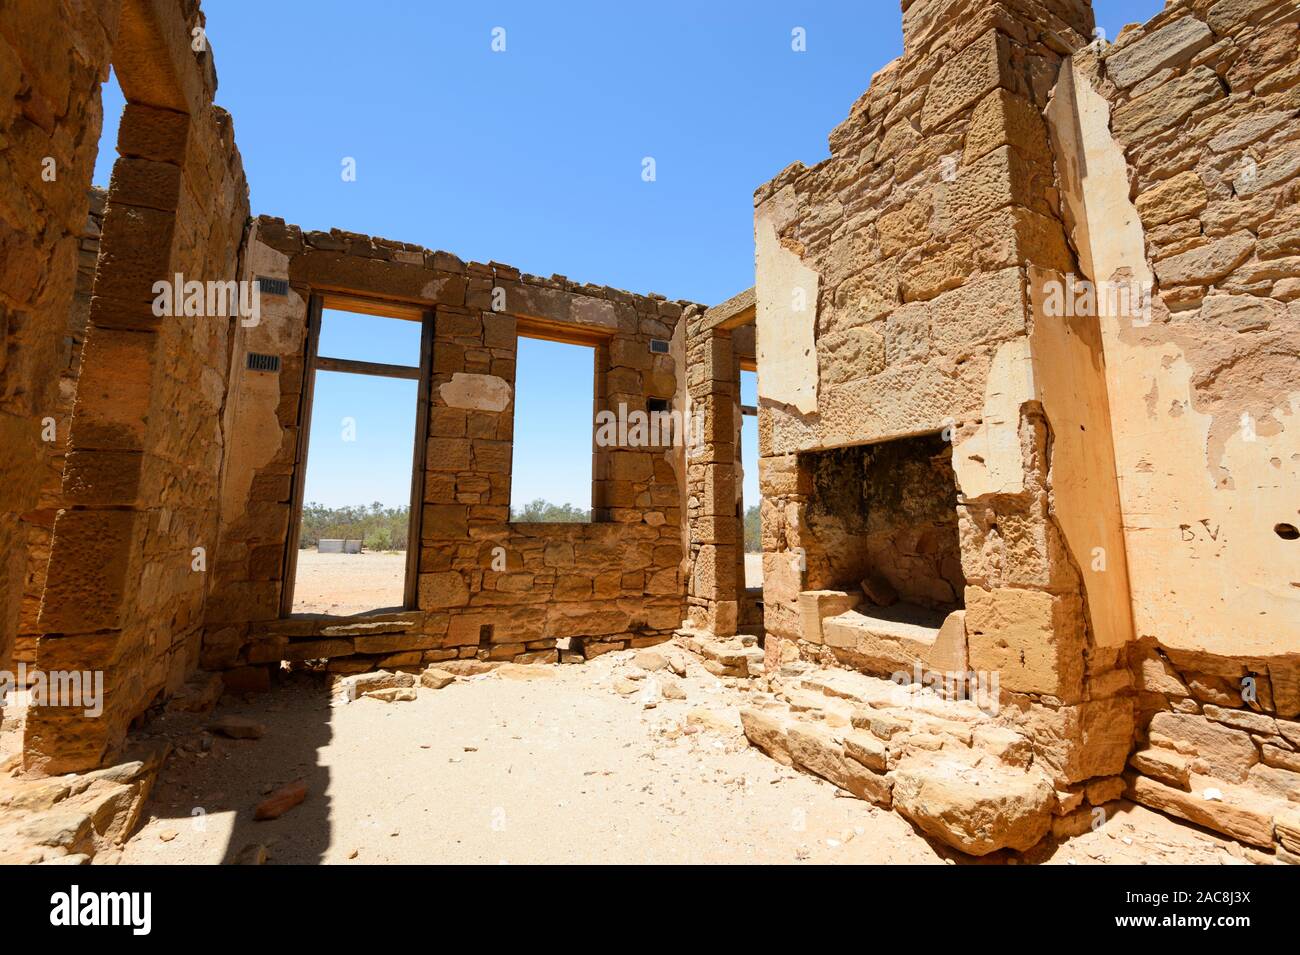 Historic ruins of the pioneers Baker family's home in the remote Outback town of Milparinka, New South Wales, NSW, Australia Stock Photo